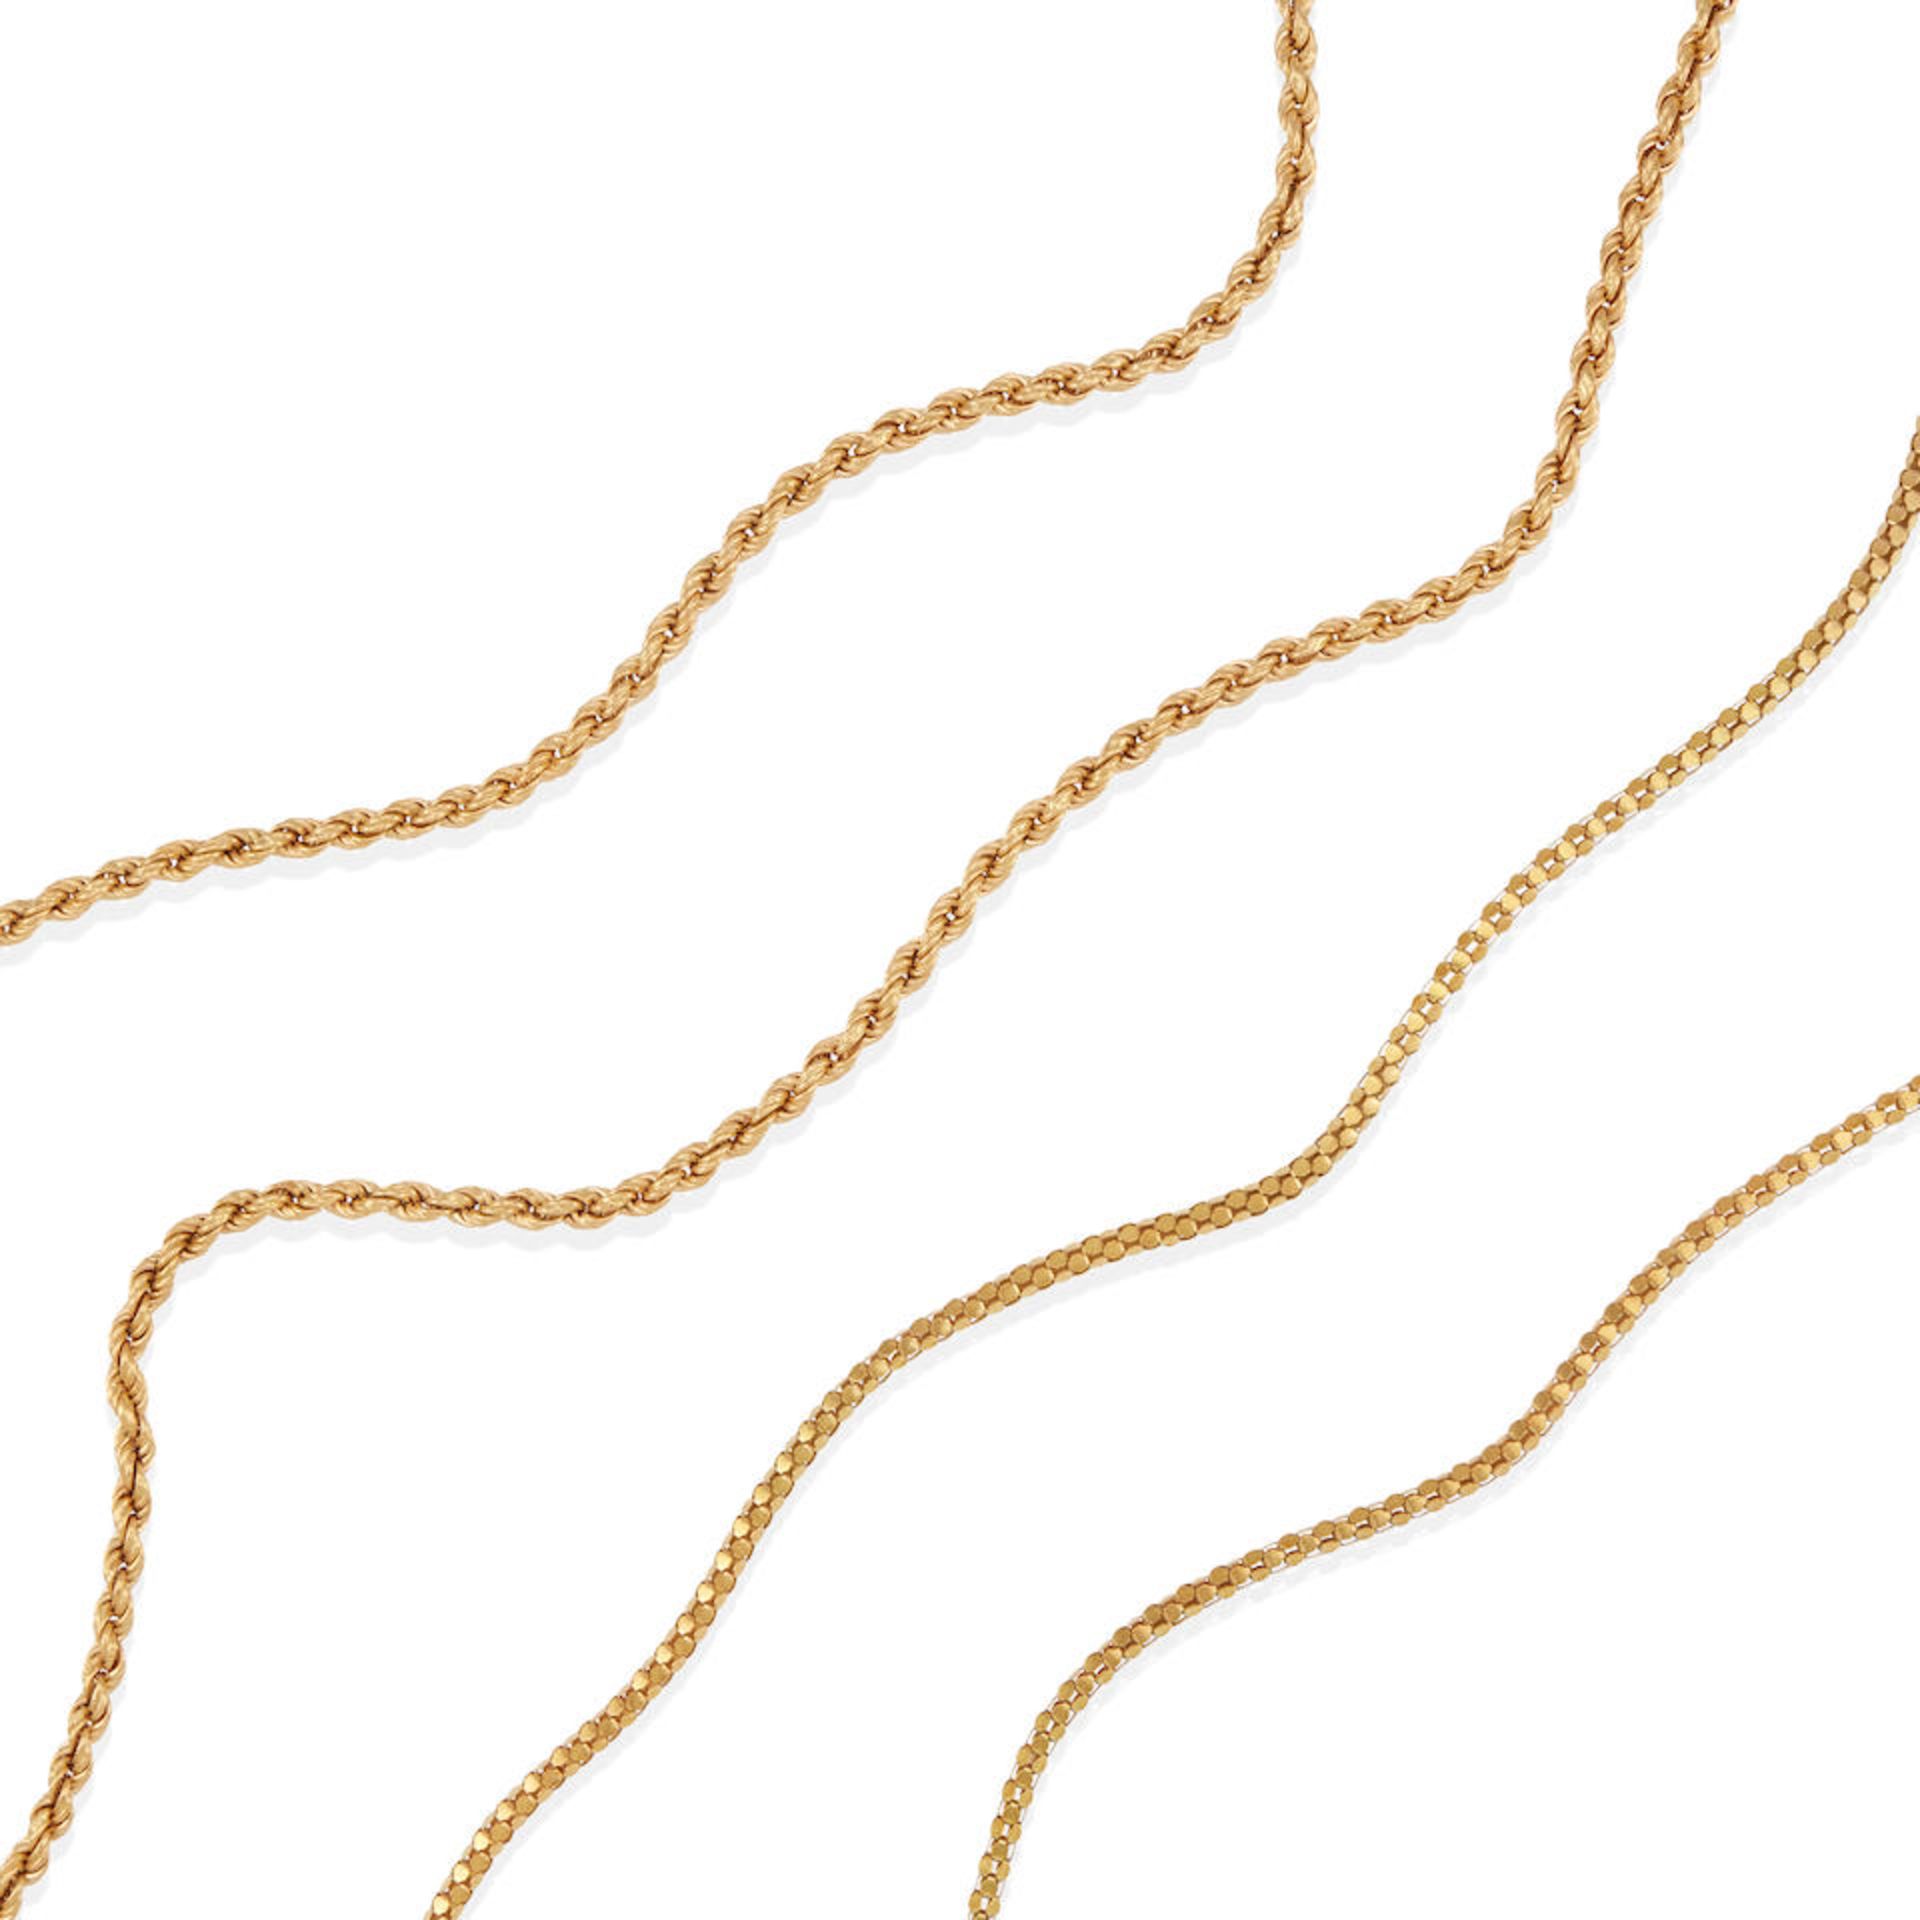 TWO 18K GOLD CHAIN NECKLACES - Image 2 of 2